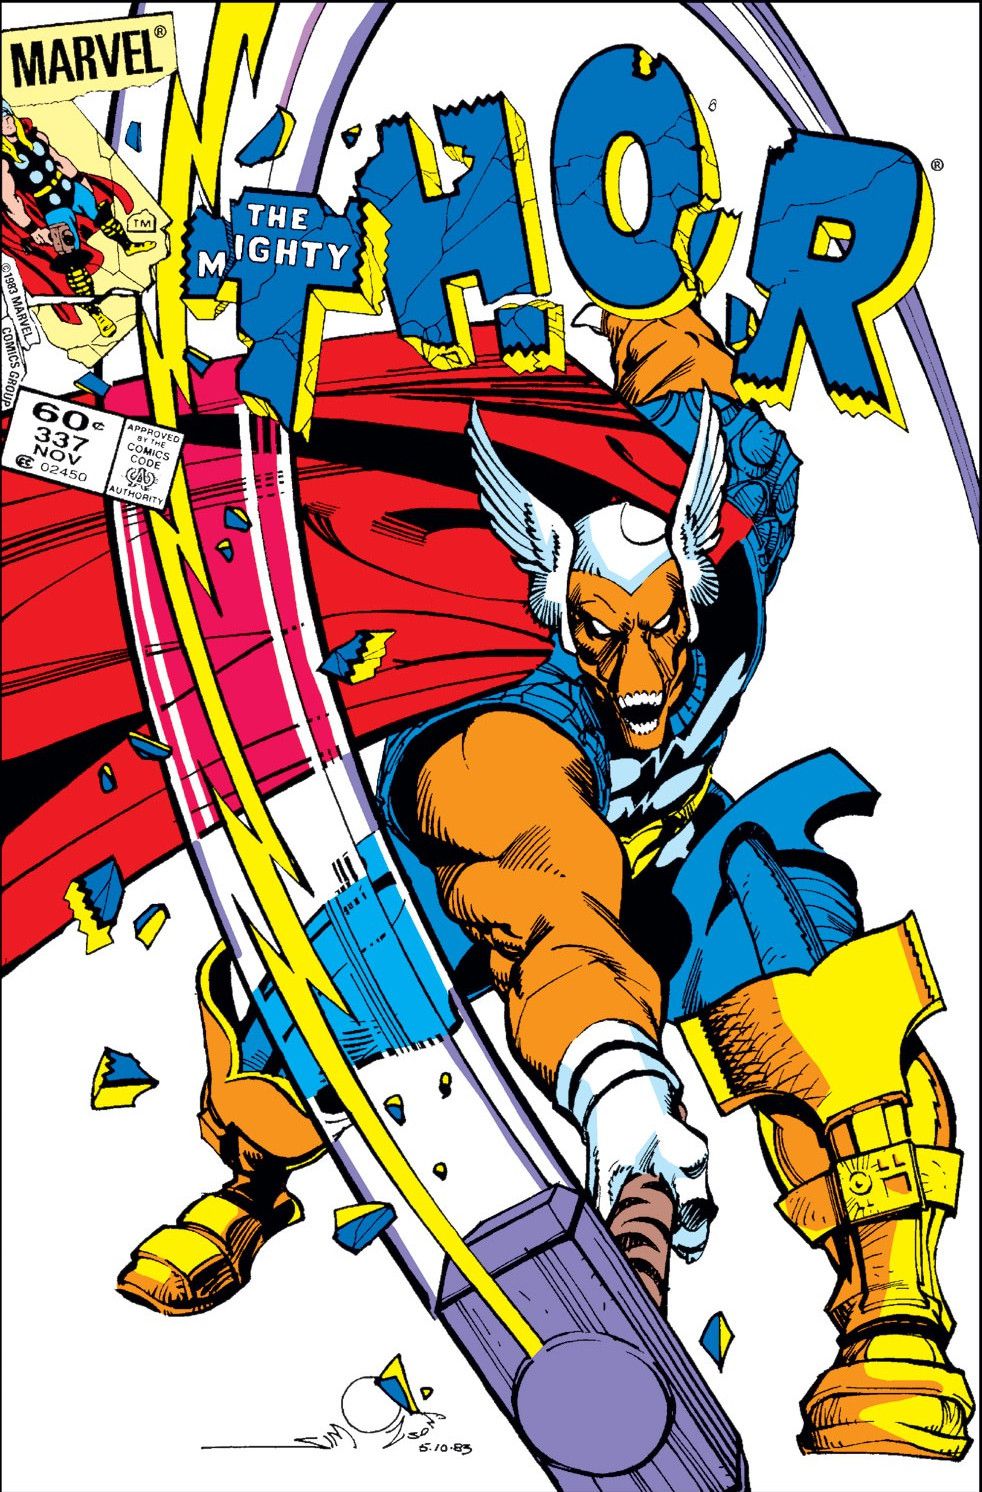 Beta Ray Bill — an orange space warrior with a face like a horse’s skull — swings Mjolnir down, smashing the letters “THOR” on the cover of Thor #337, Marvel Comics (1983). 